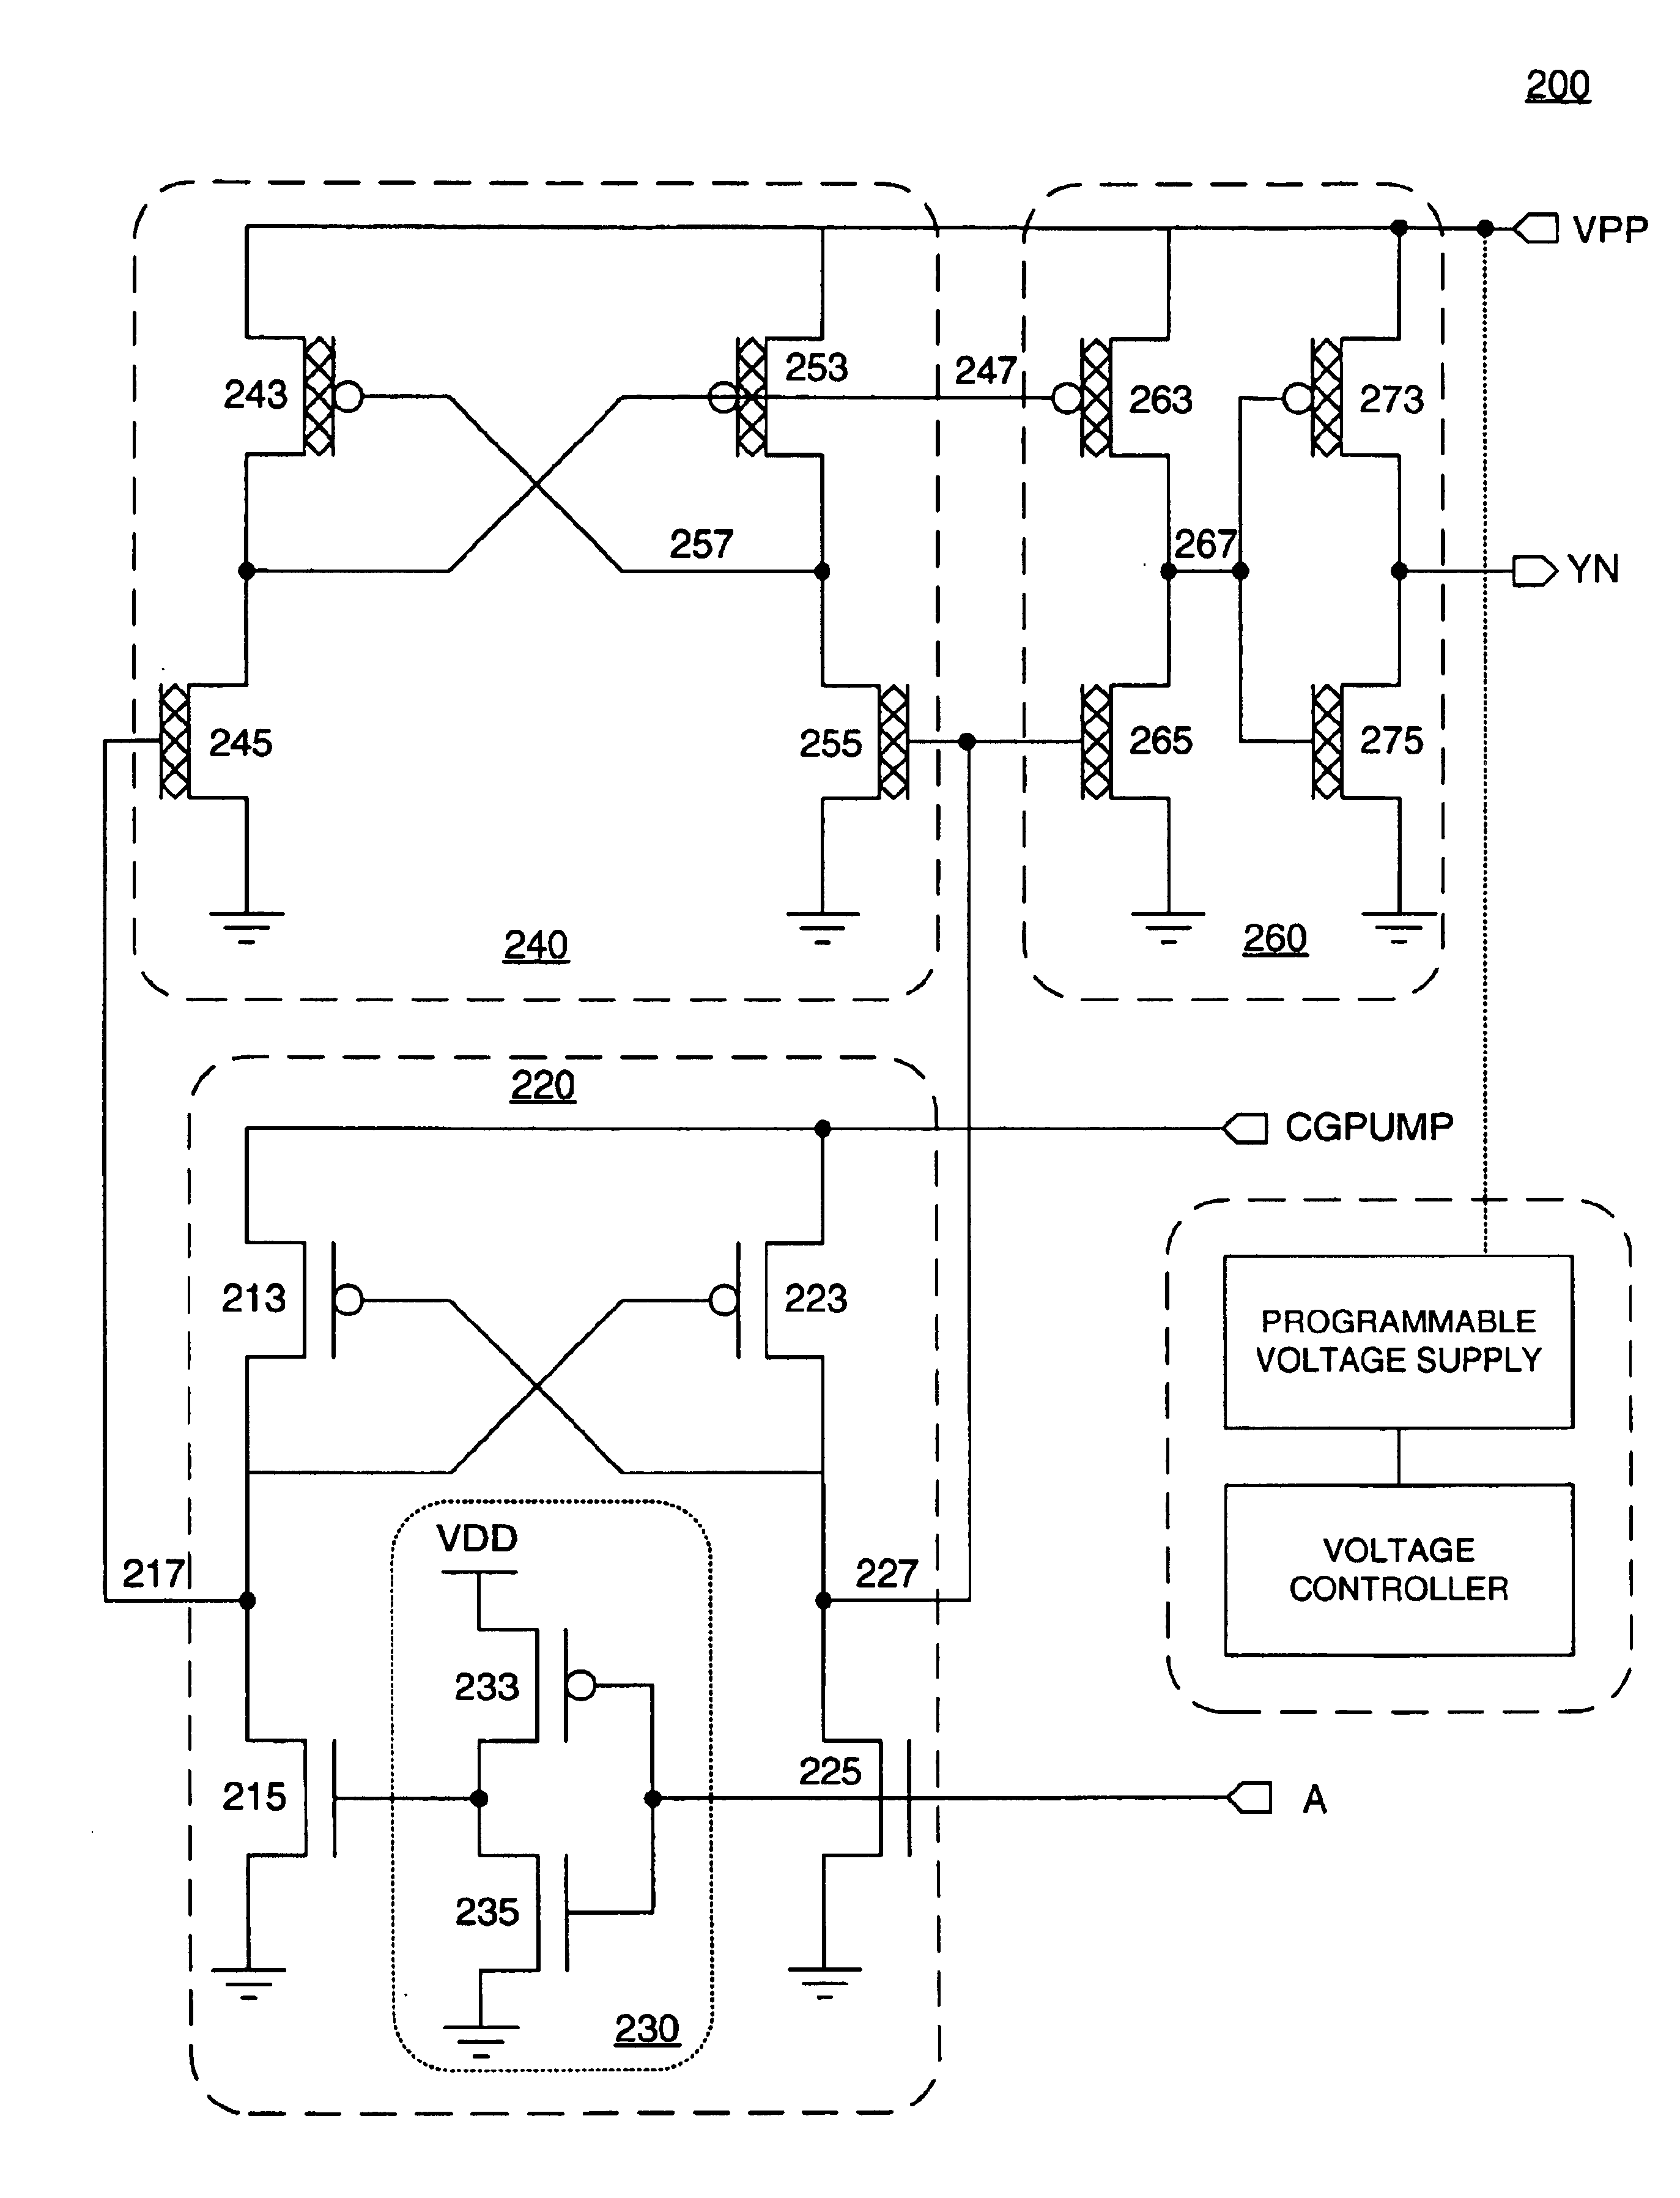 Dual stage level shifter for low voltage operation